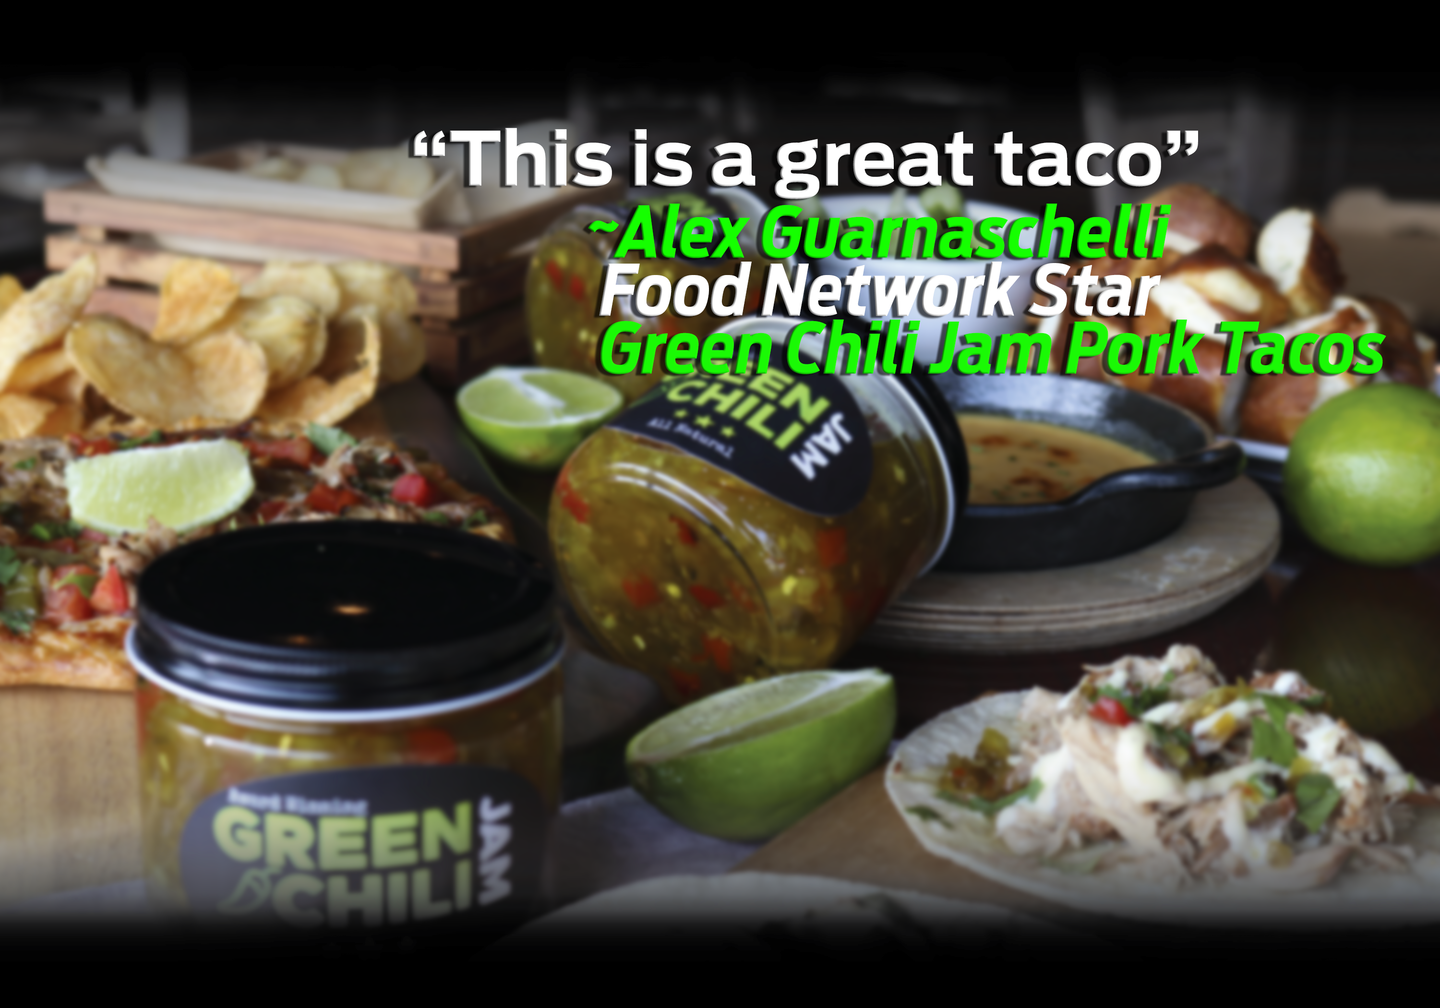 Our all-natural, gluten-free, vegan Green Chili Jam can be used for a variety of dishes. Put it on pizza, use it as a dip, glaze, or sauce. And did we mention tacos? It's the perfect addition to any kind of taco you can imagine!